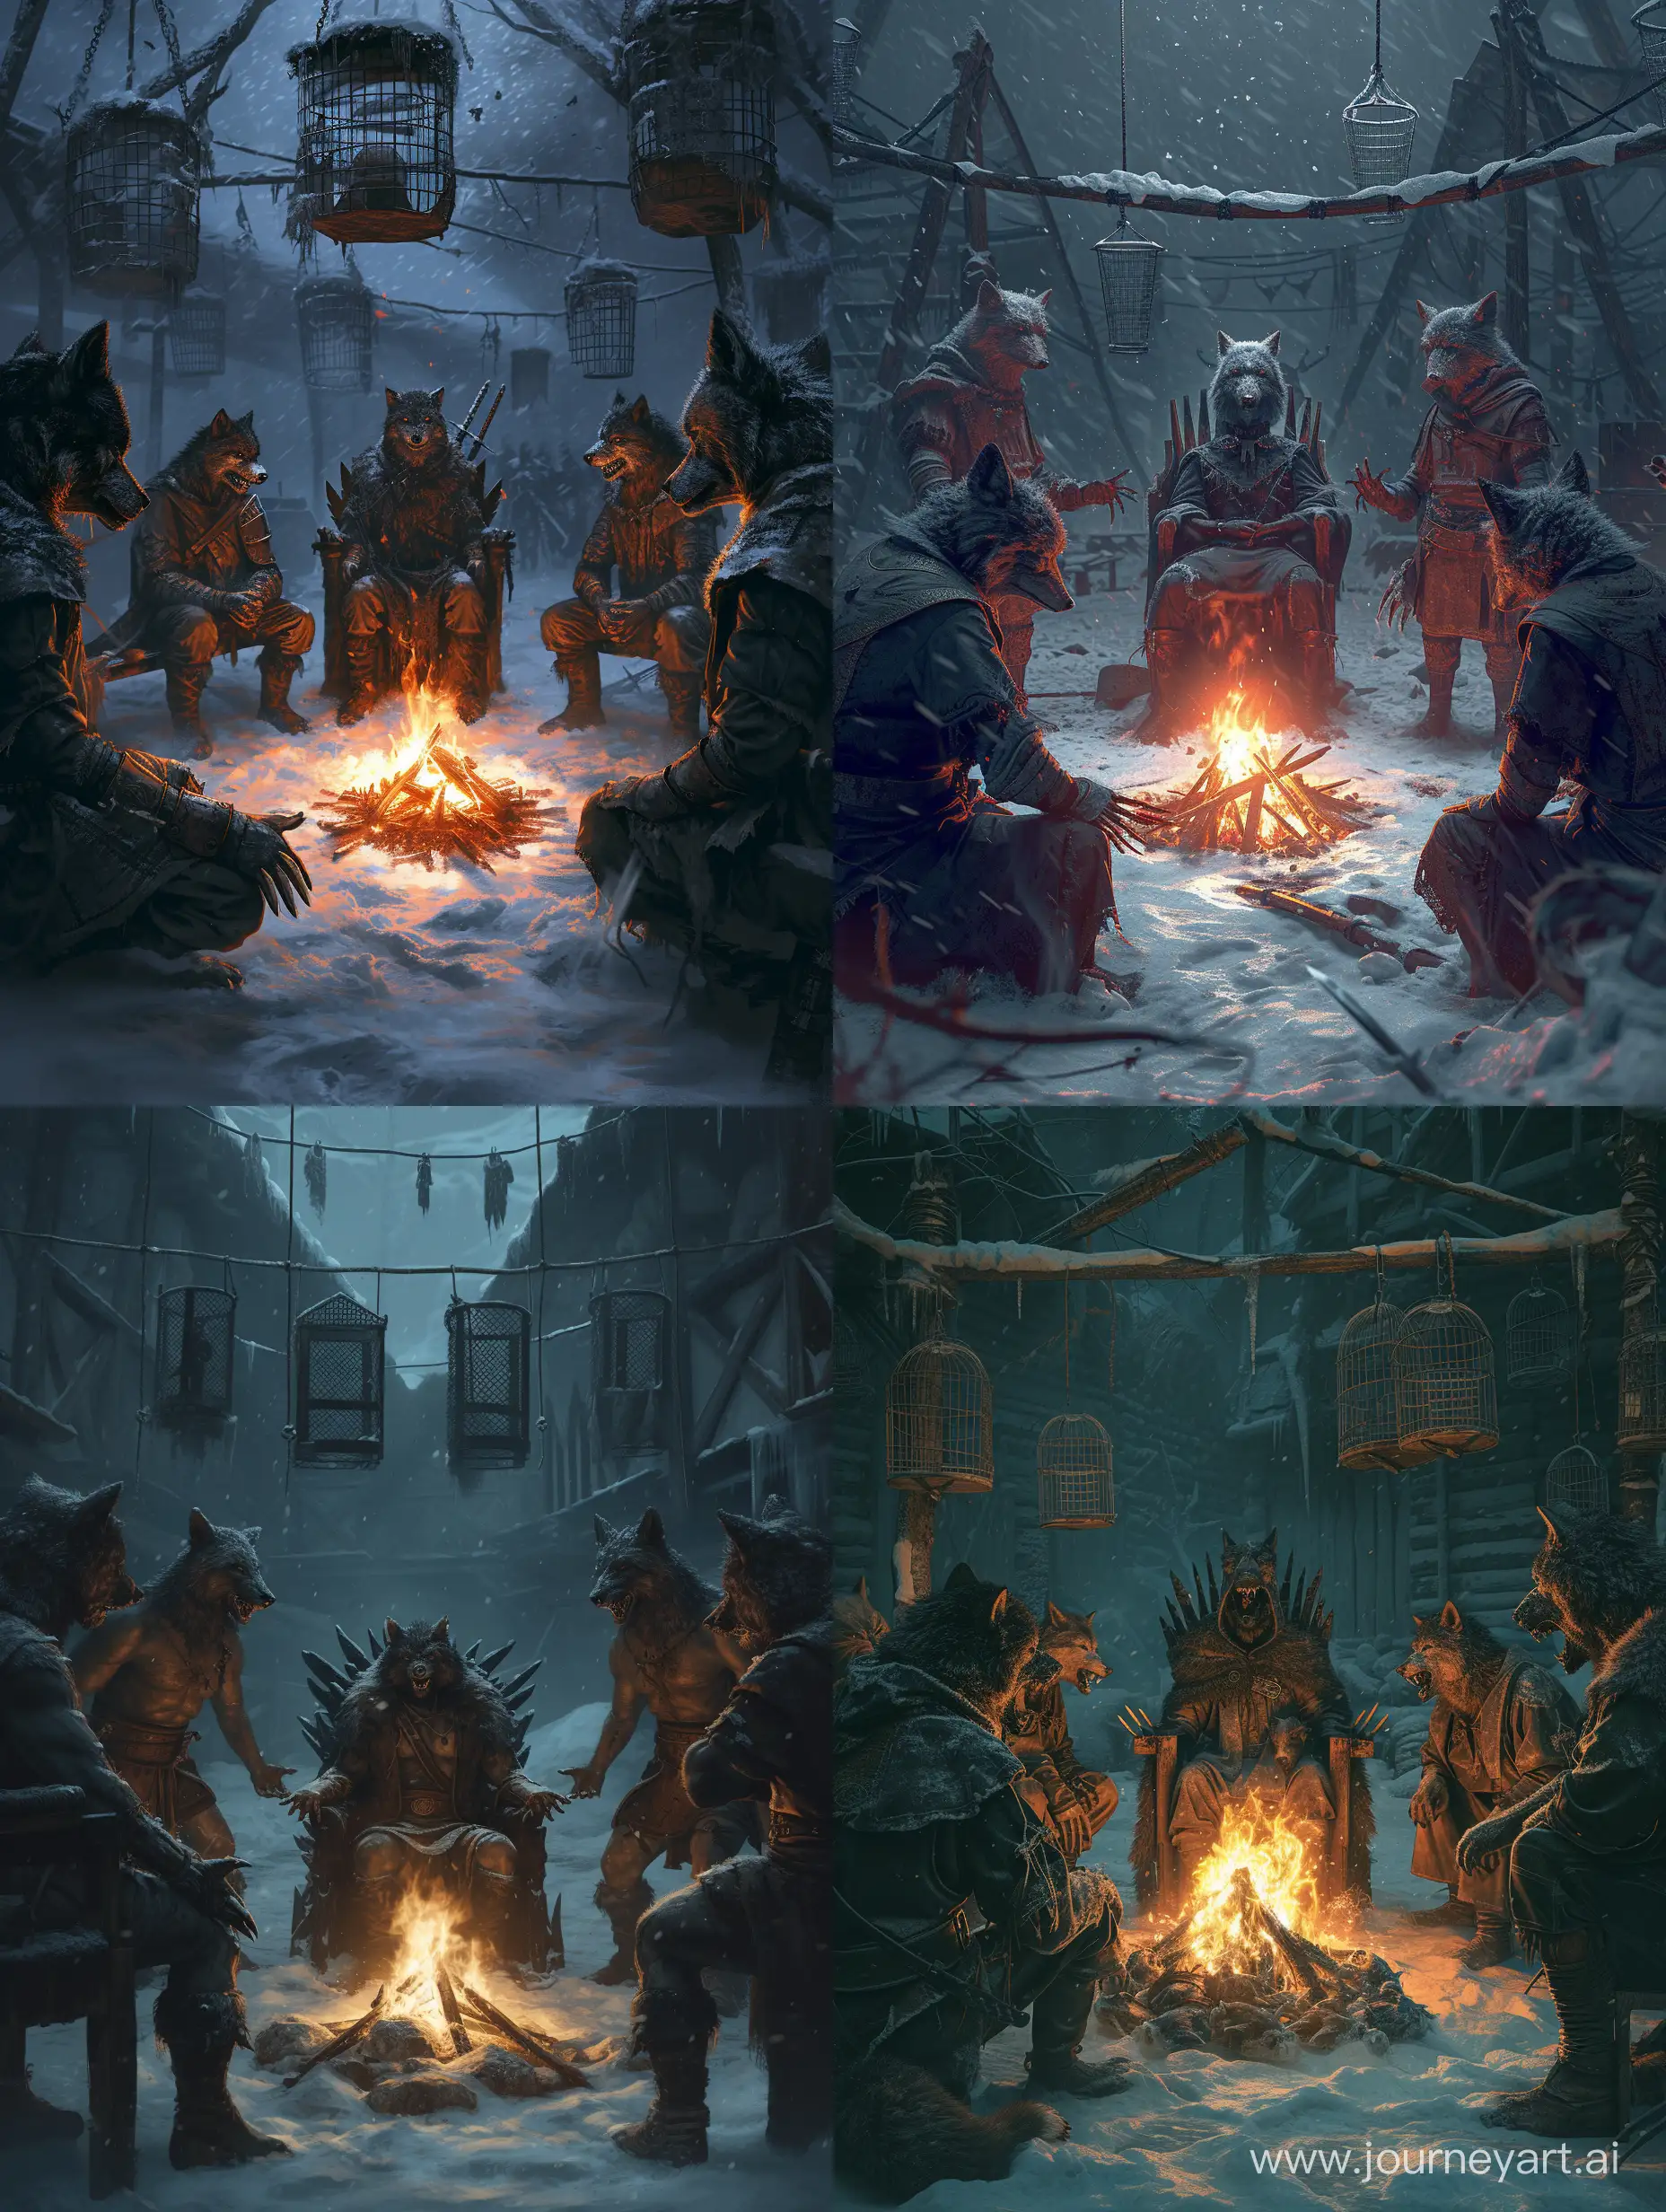 warriors with wolf's head and human body,sharp claws,circle around the fire,The leader of the wolves sitting on throne in the middle,in snowy horror camp,hanging Gibbet cages In the background,fierce,furious,irate,Detailed clothing.incredible detail,dark light,terrifying,Digital Art.